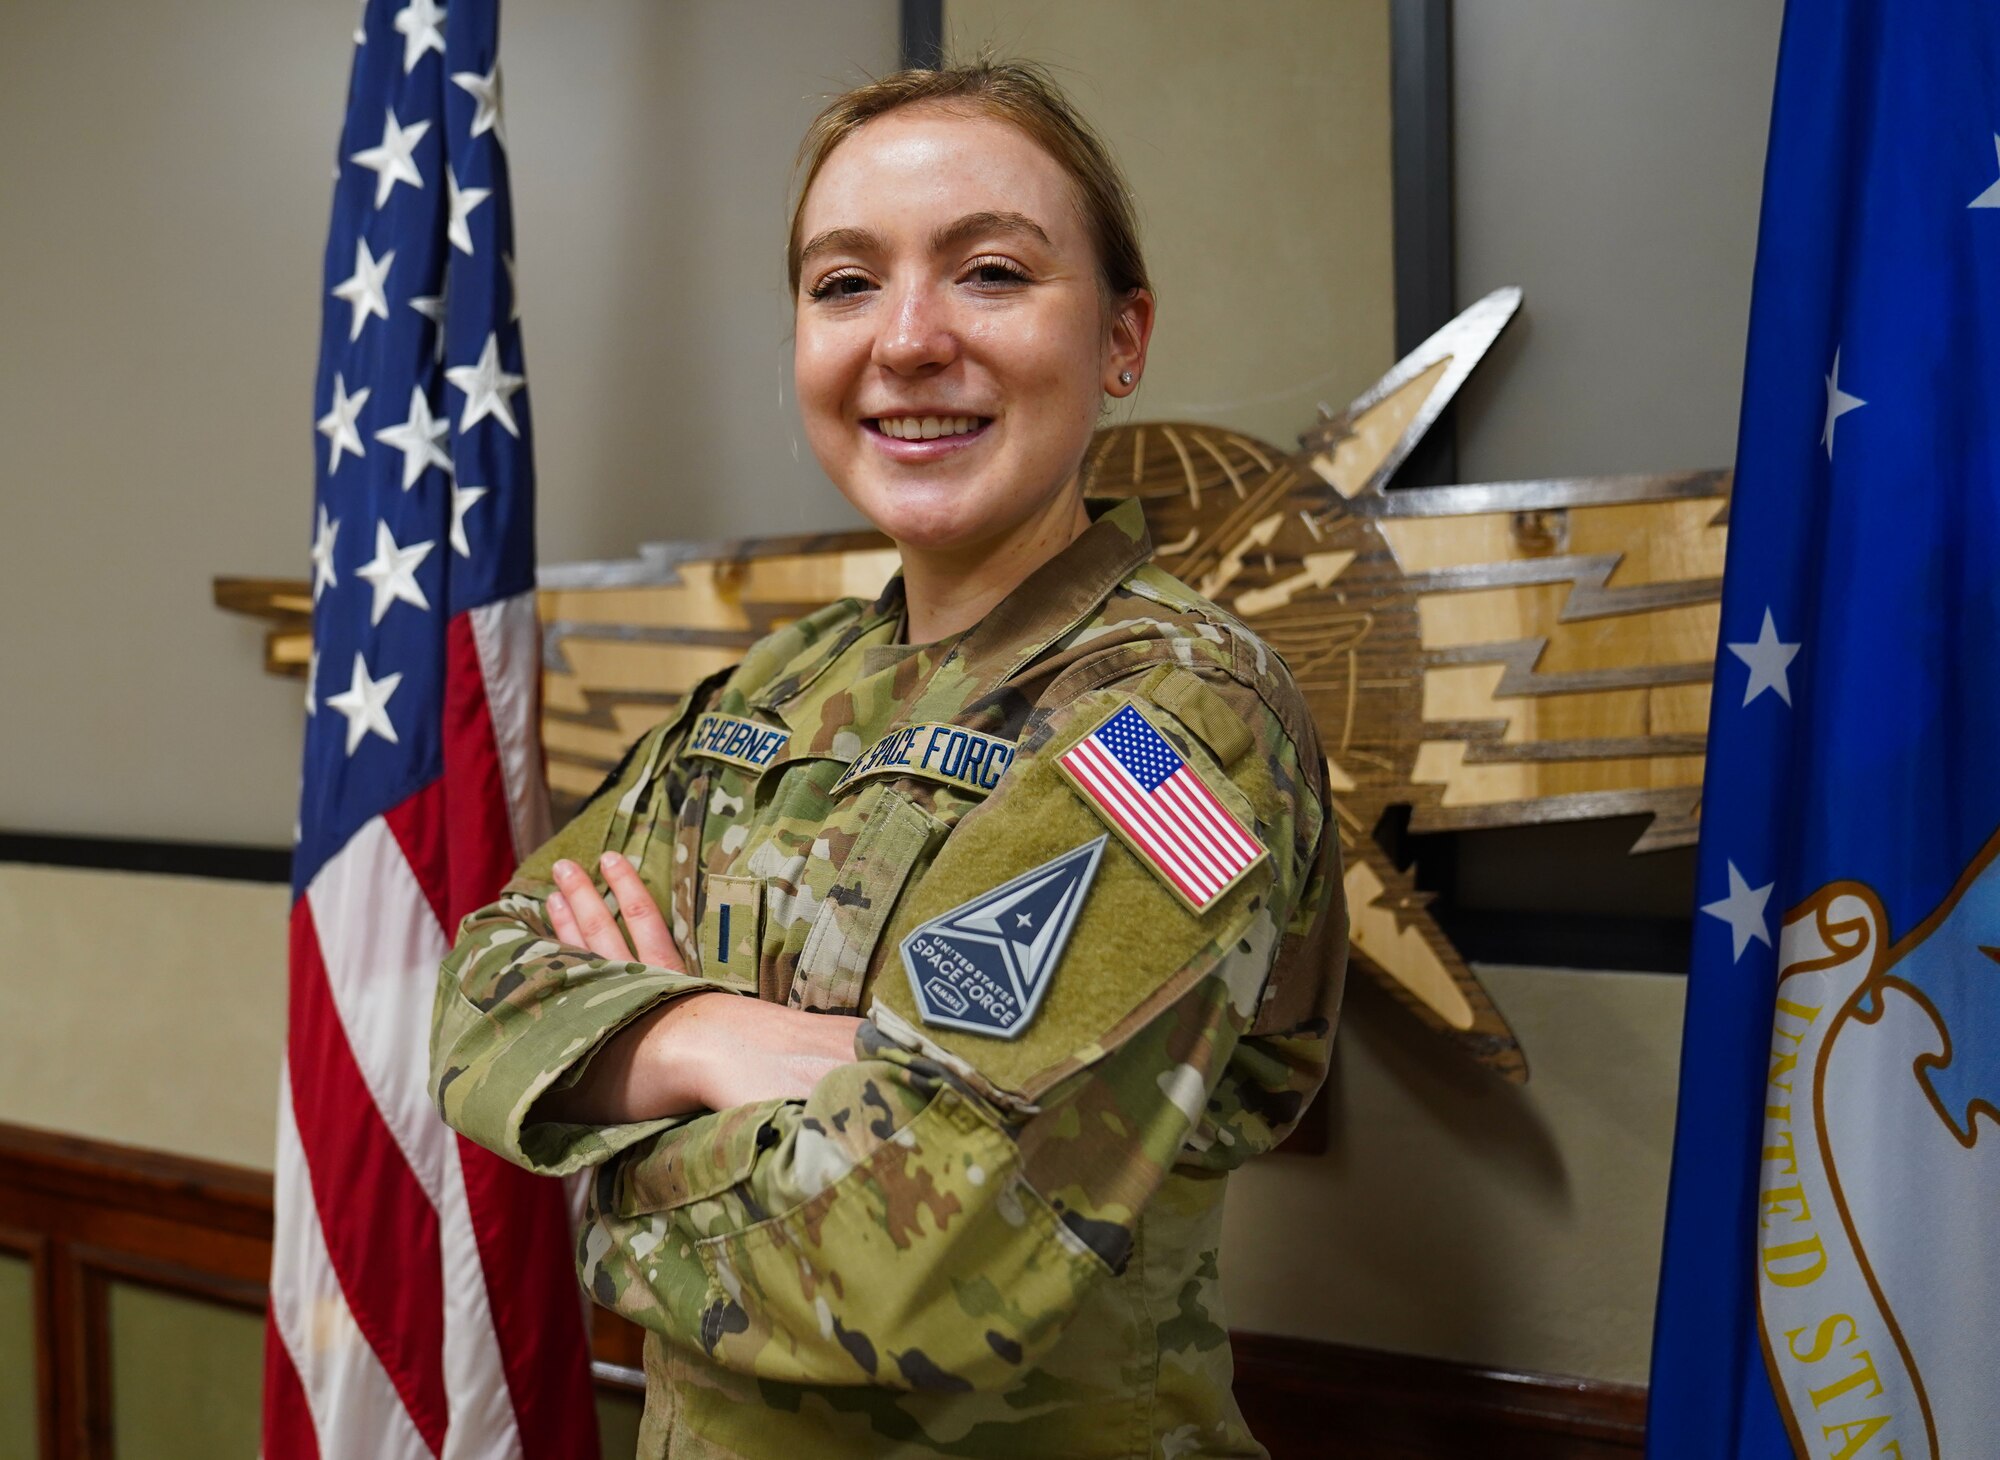 Portrait photo of 1st Lt. Katie Scheibner posing with her arms crossed in front of a U.S. flag and an Air Force flag.